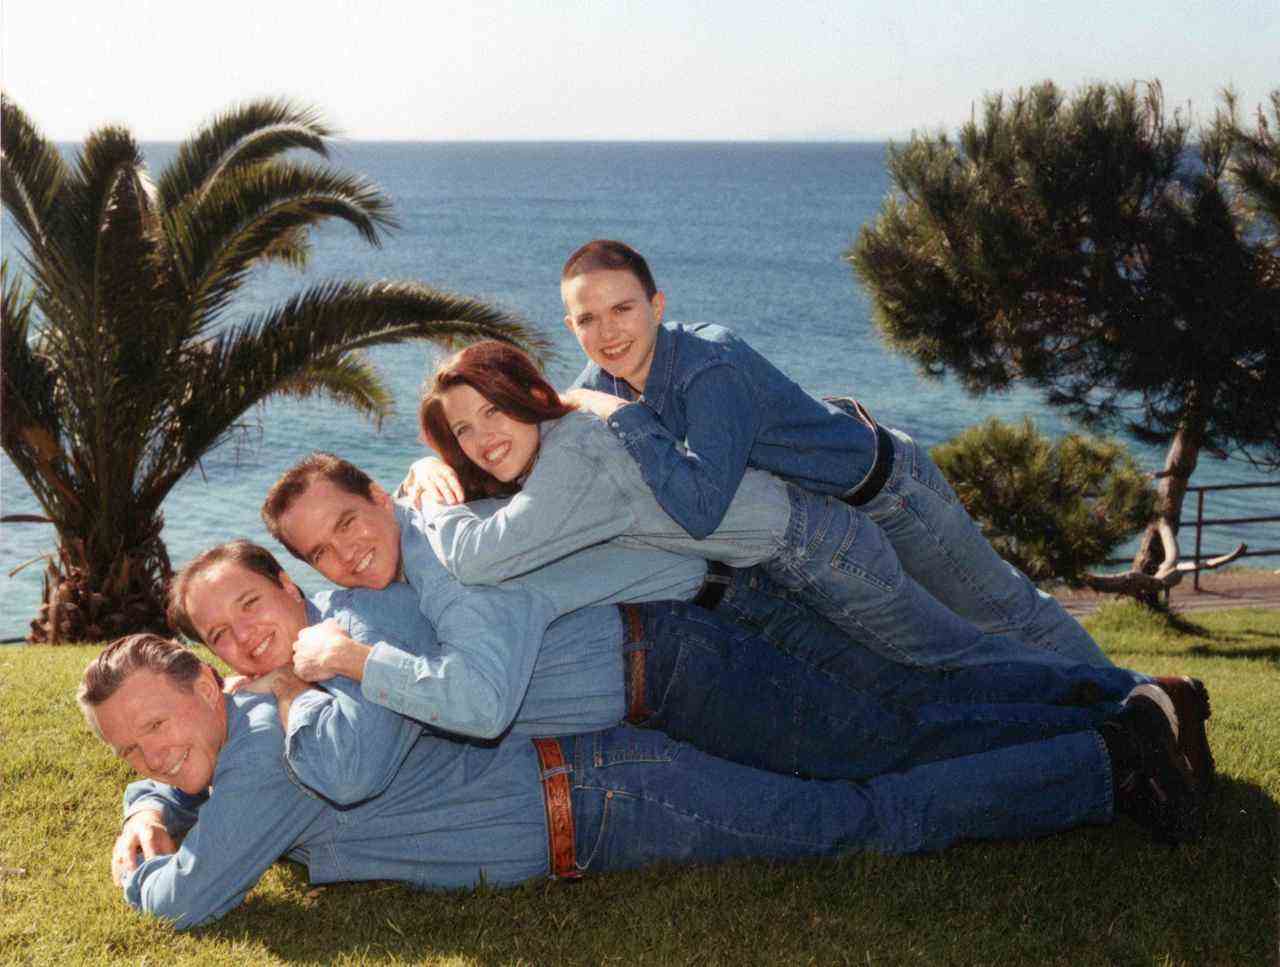 What’s Your Favorite Awkward Family Photo?